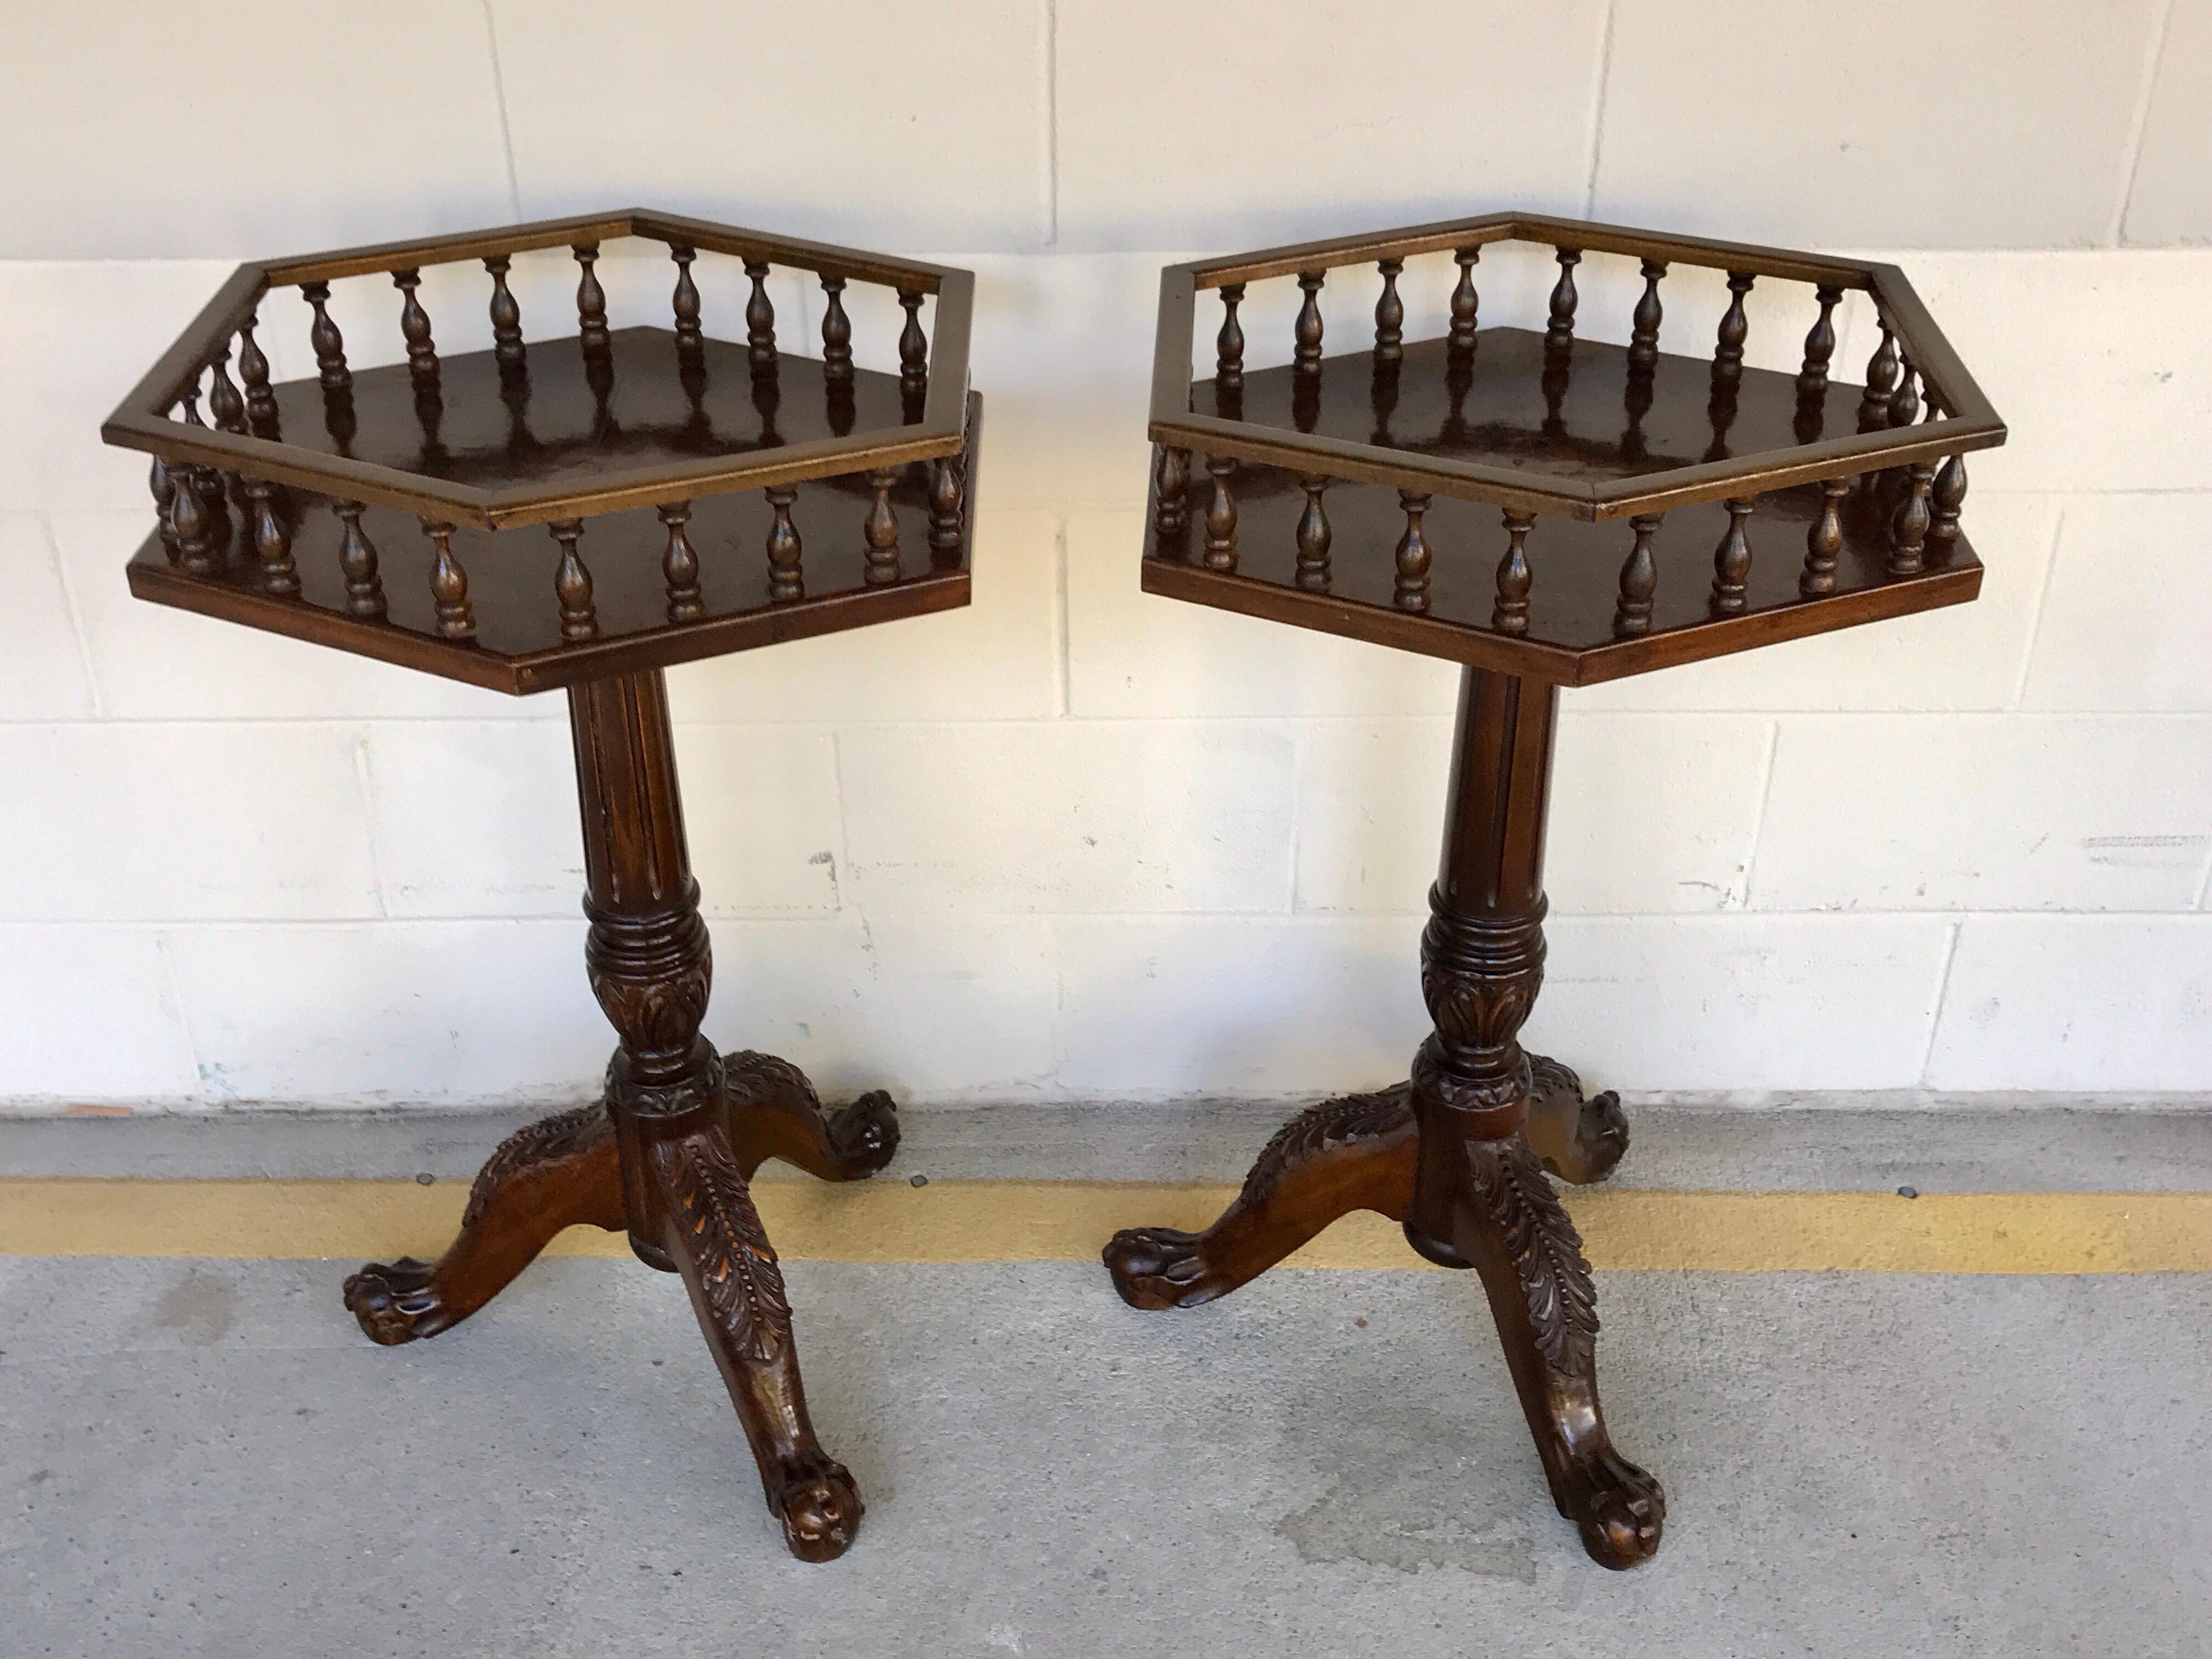 Pair of Georgian style gallery tables, each one with a diamond shaped 5